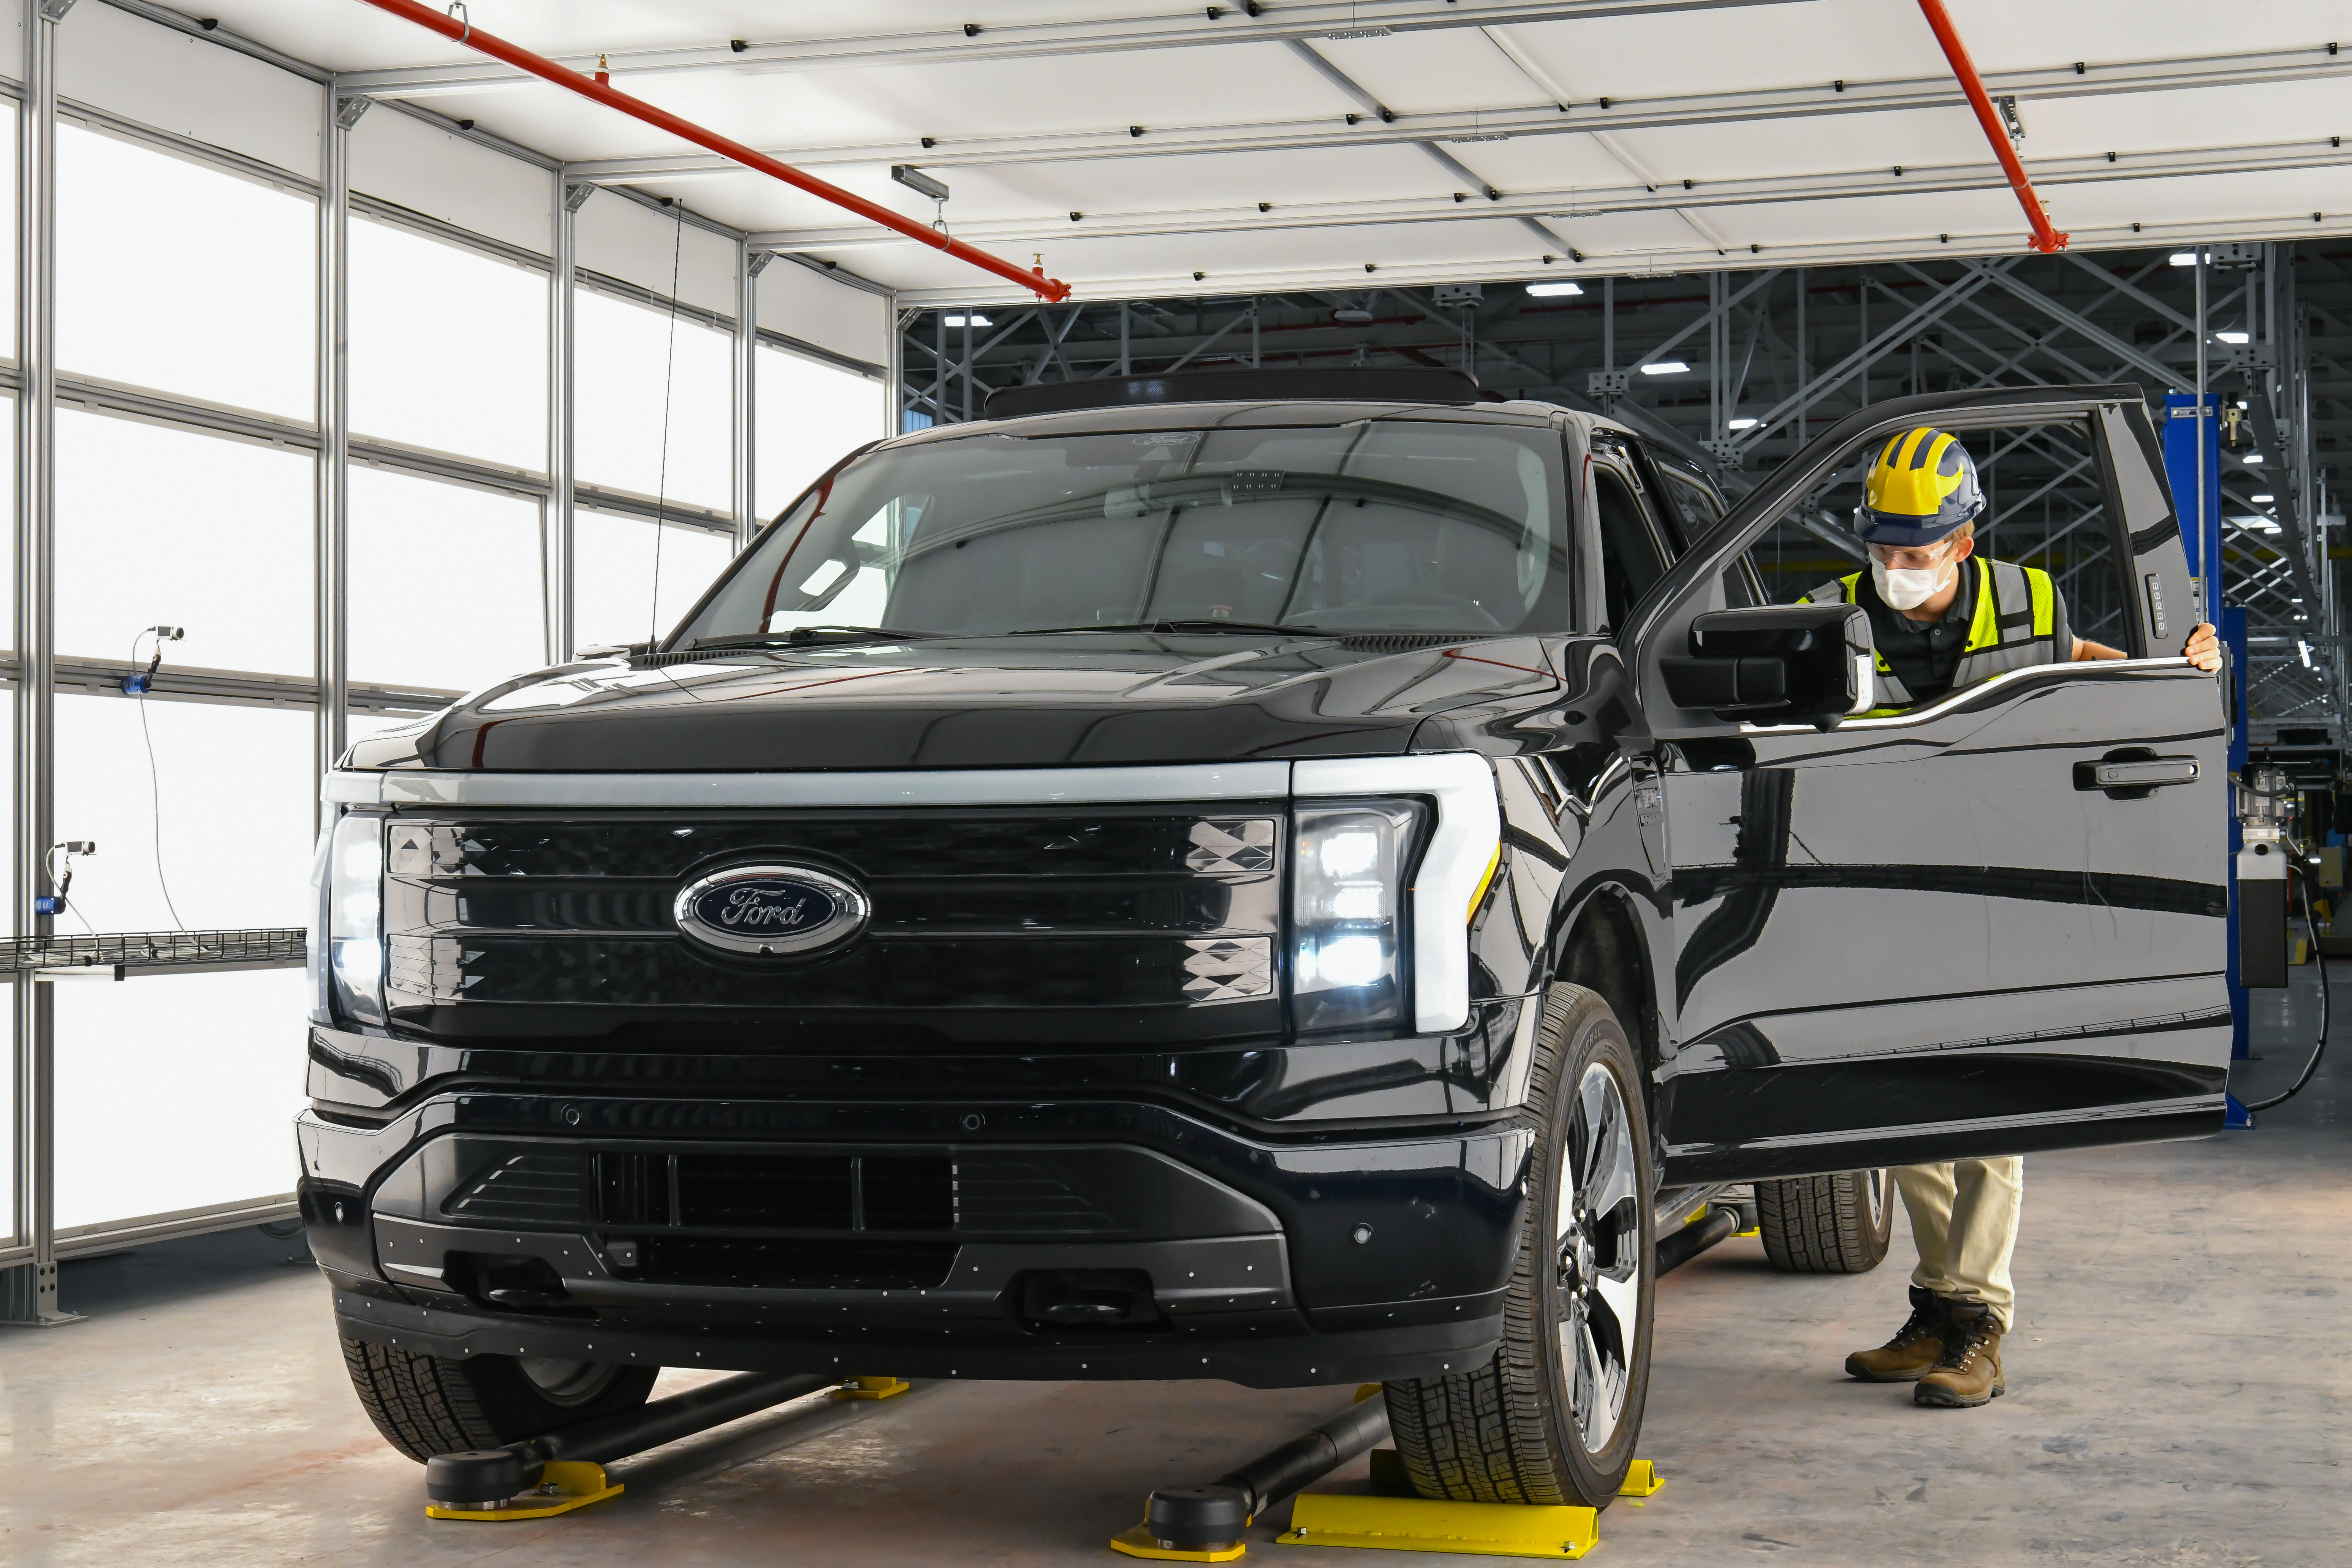 Ford is planning to nearly double production capacity of the all-electric F-150 Lightning™ pickup to 150,000 vehicles per year at the Rouge Electric Vehicle Center in Dearborn, Michigan, to meet soaring customer demand.